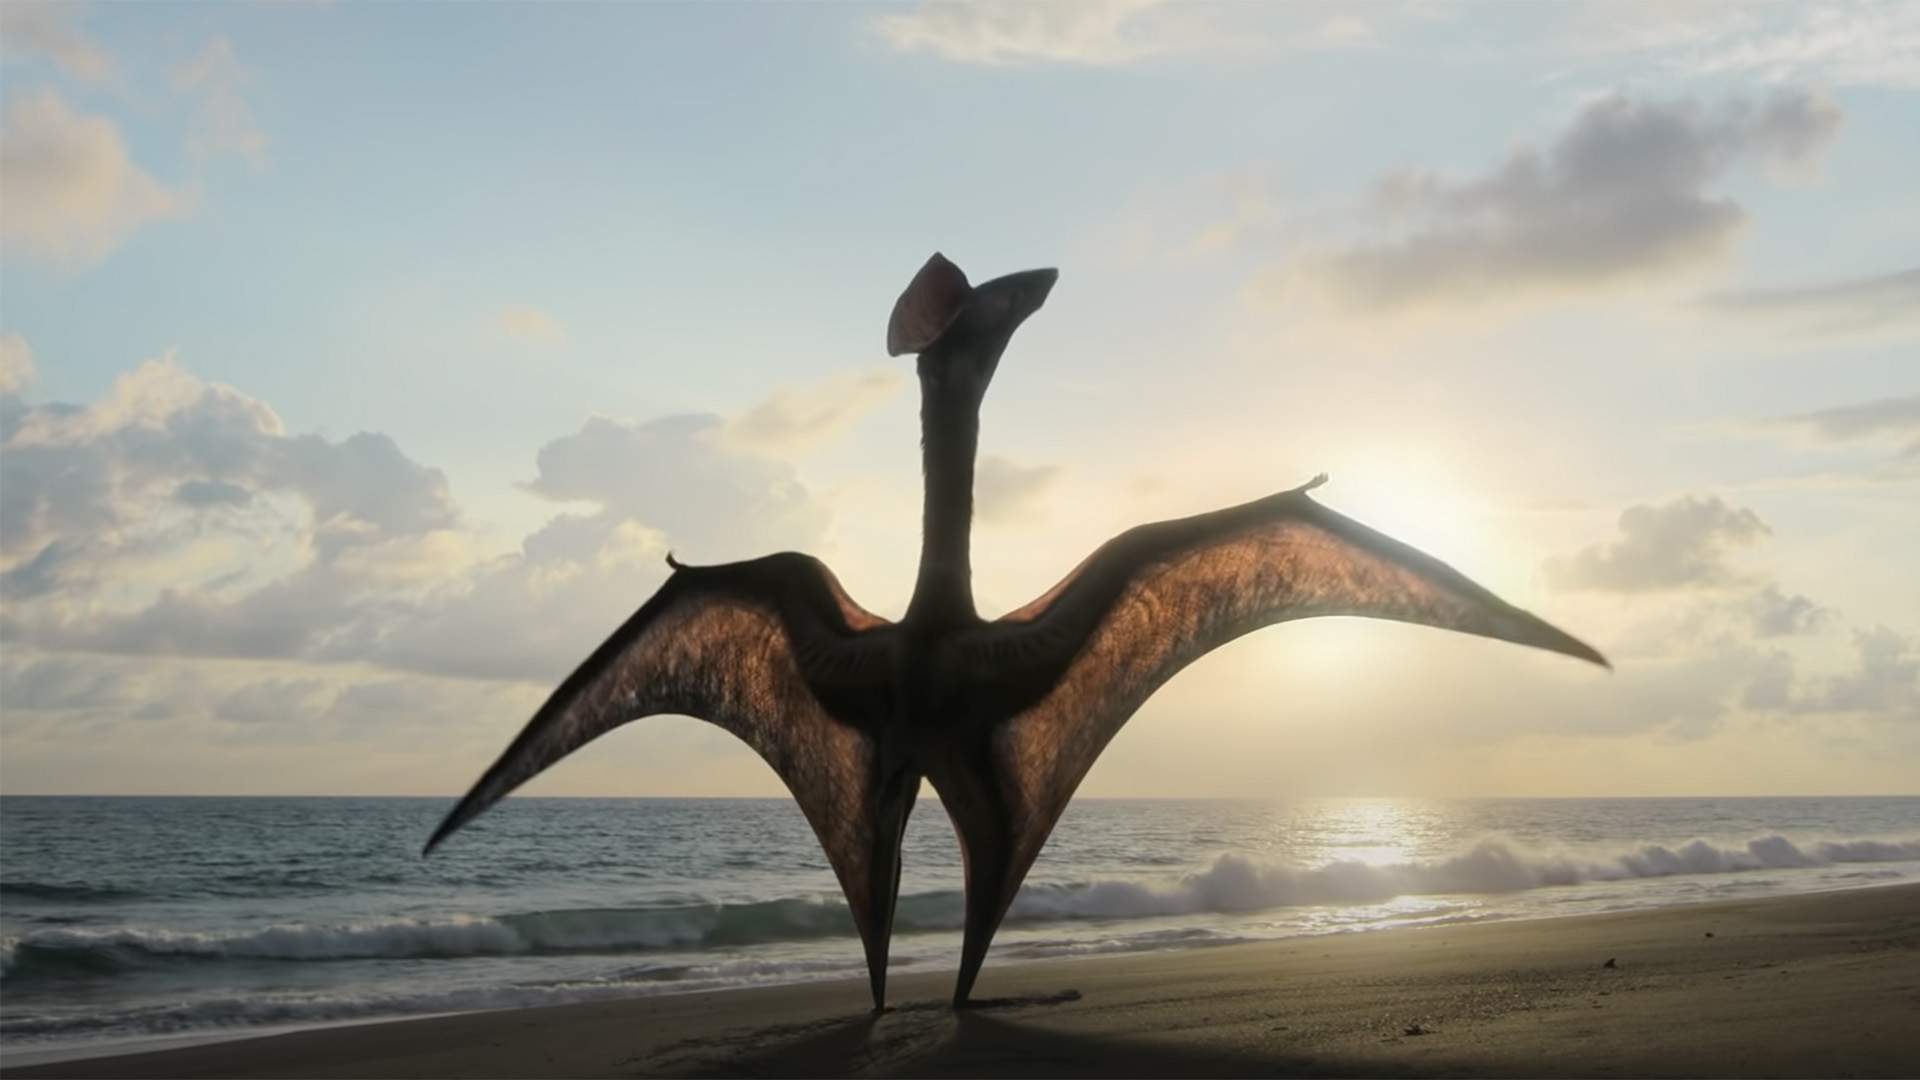 David Attenborough's Must-See Natural History Series About Dinosaurs Just Dropped Its Full Trailer